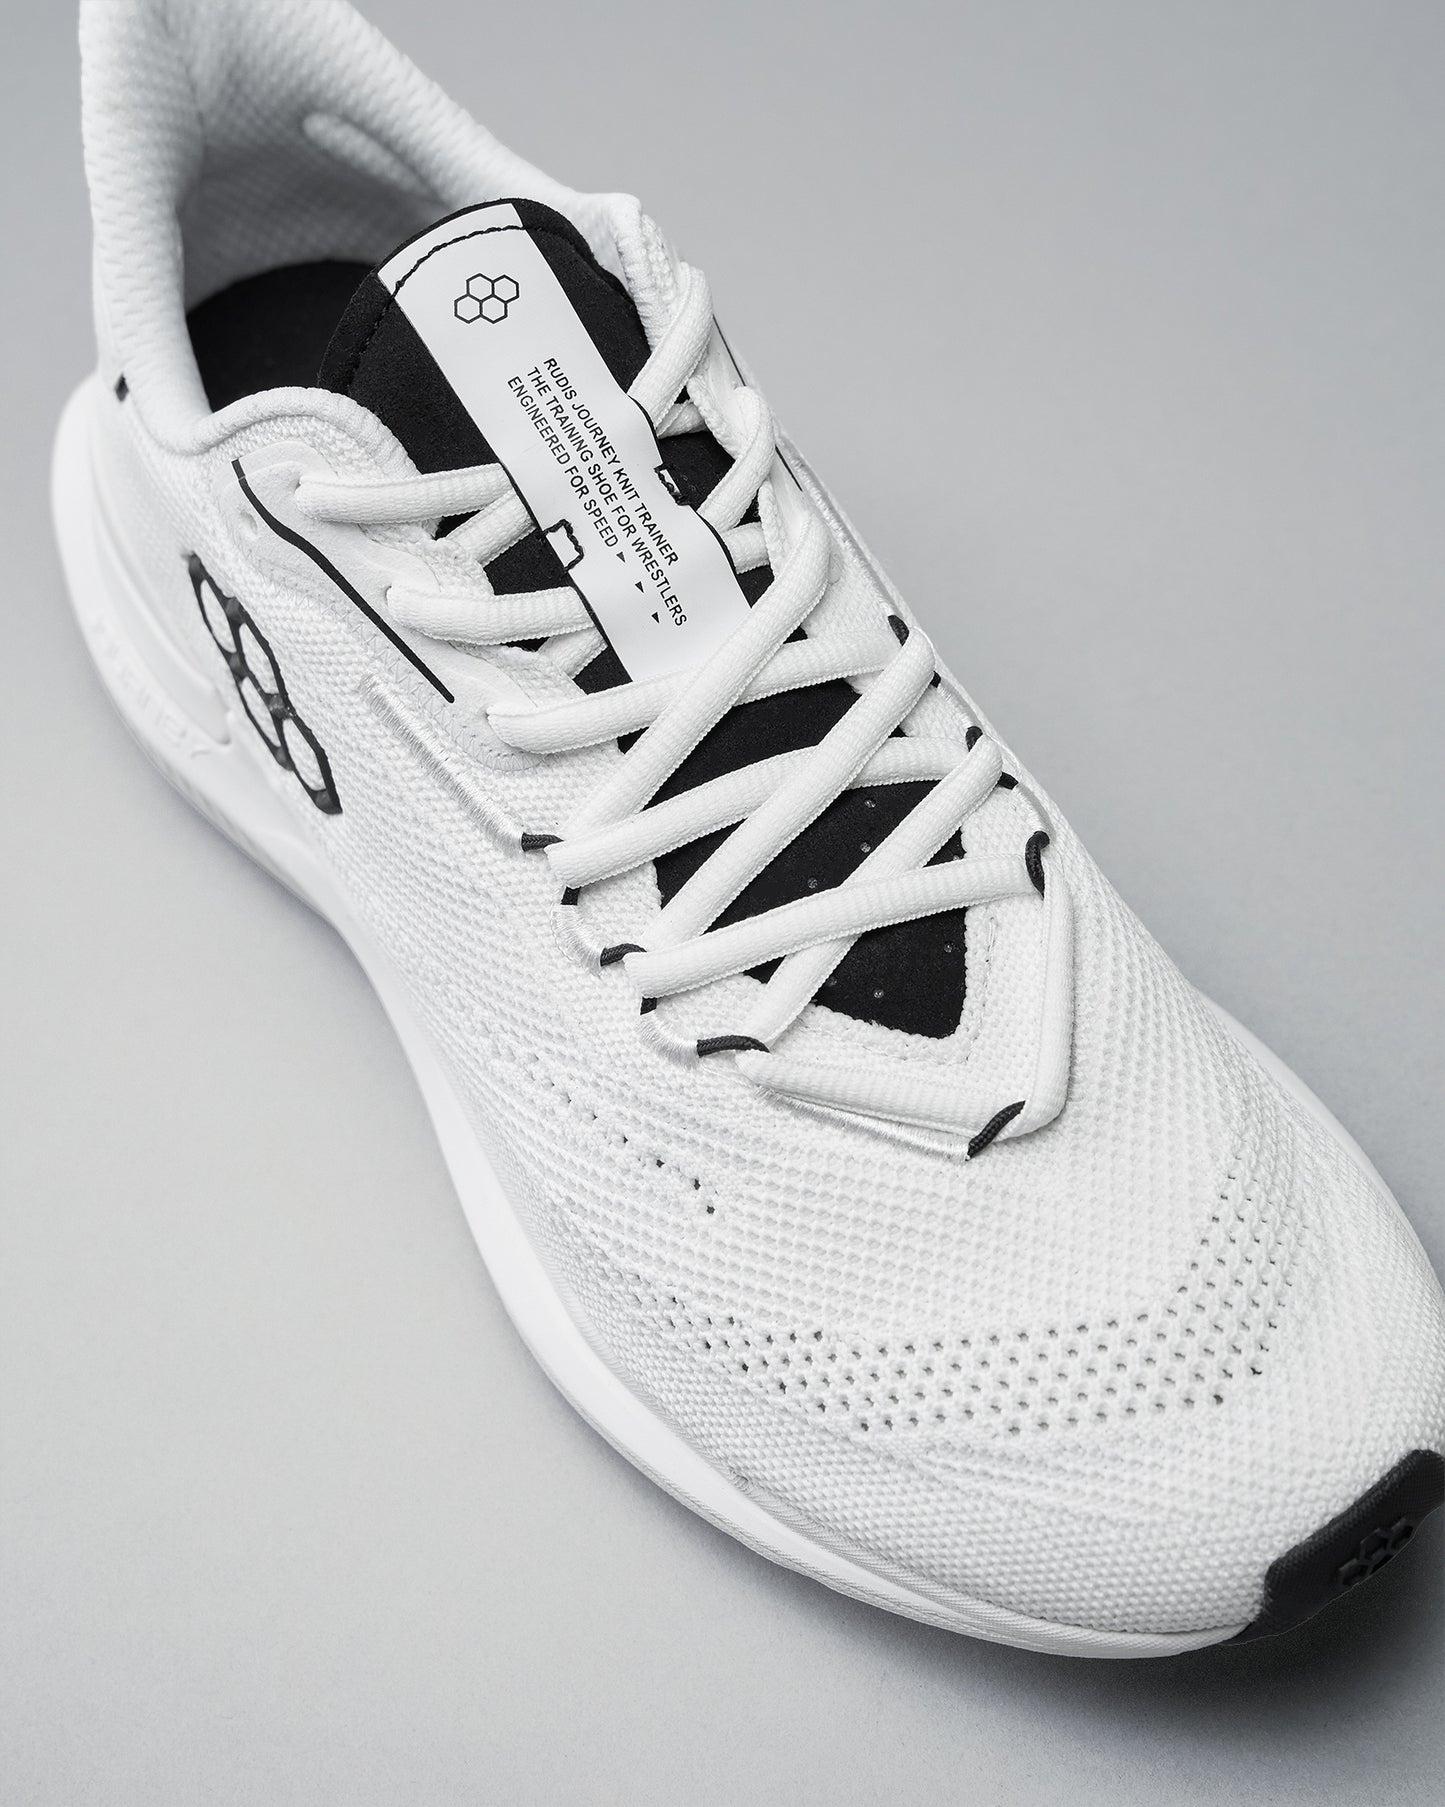 RUDIS Journey Knit Adult Training Shoes - White/Neon